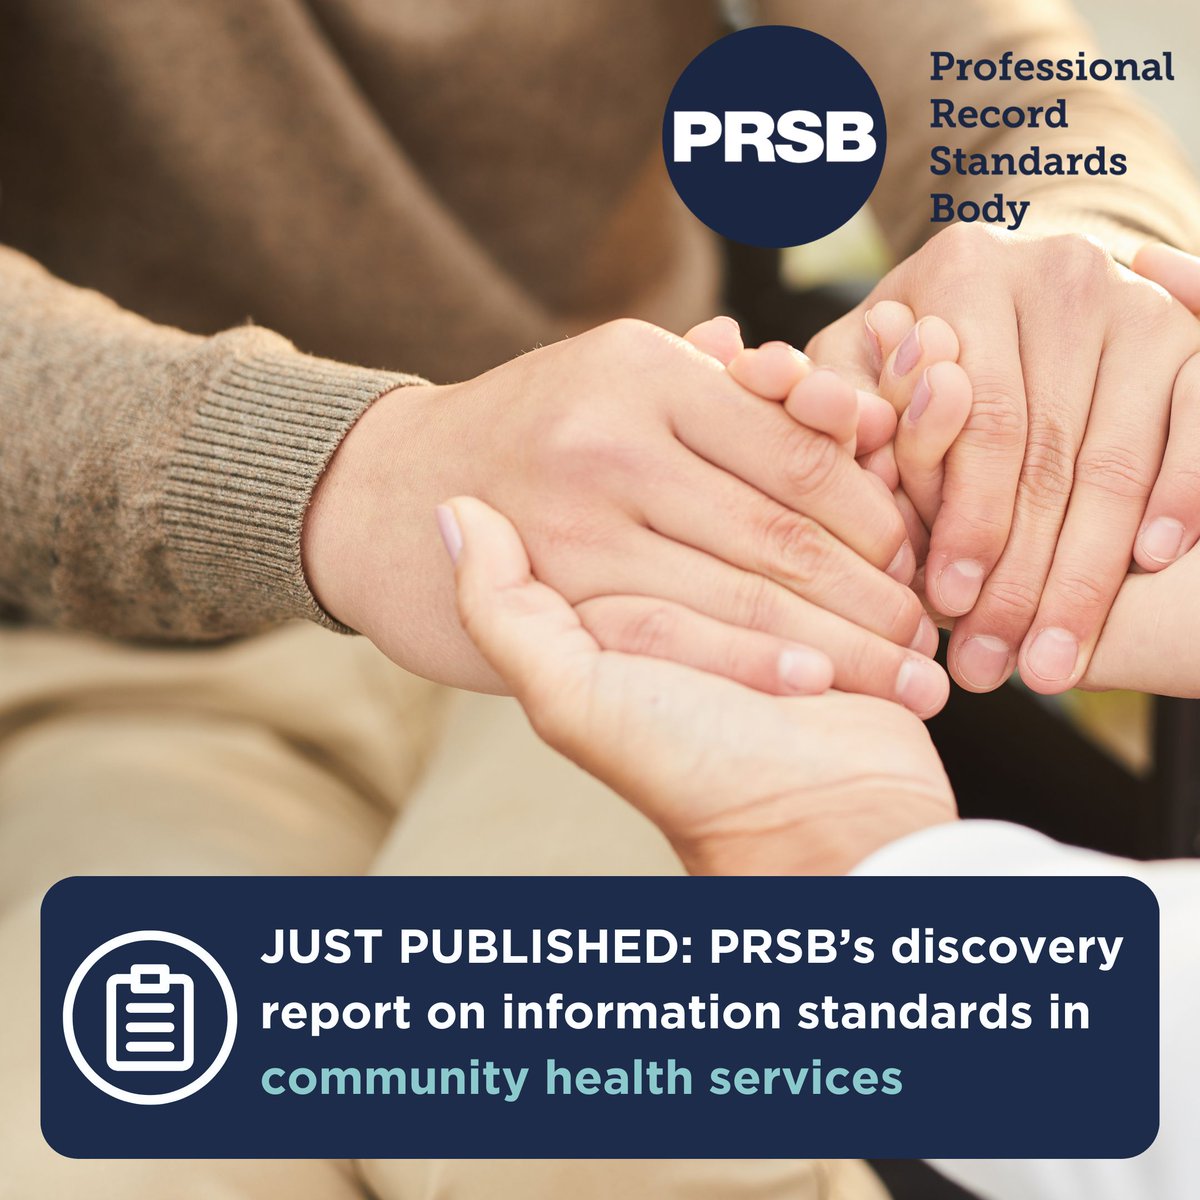 There are over 800 #CommunityHealth providers in England which are key to providing #IntegratedCare. The latest report from the PRSB identifies challenges and opportunities in information sharing to support the delivery of #CommunityServices: theprsb.org/community-heal…